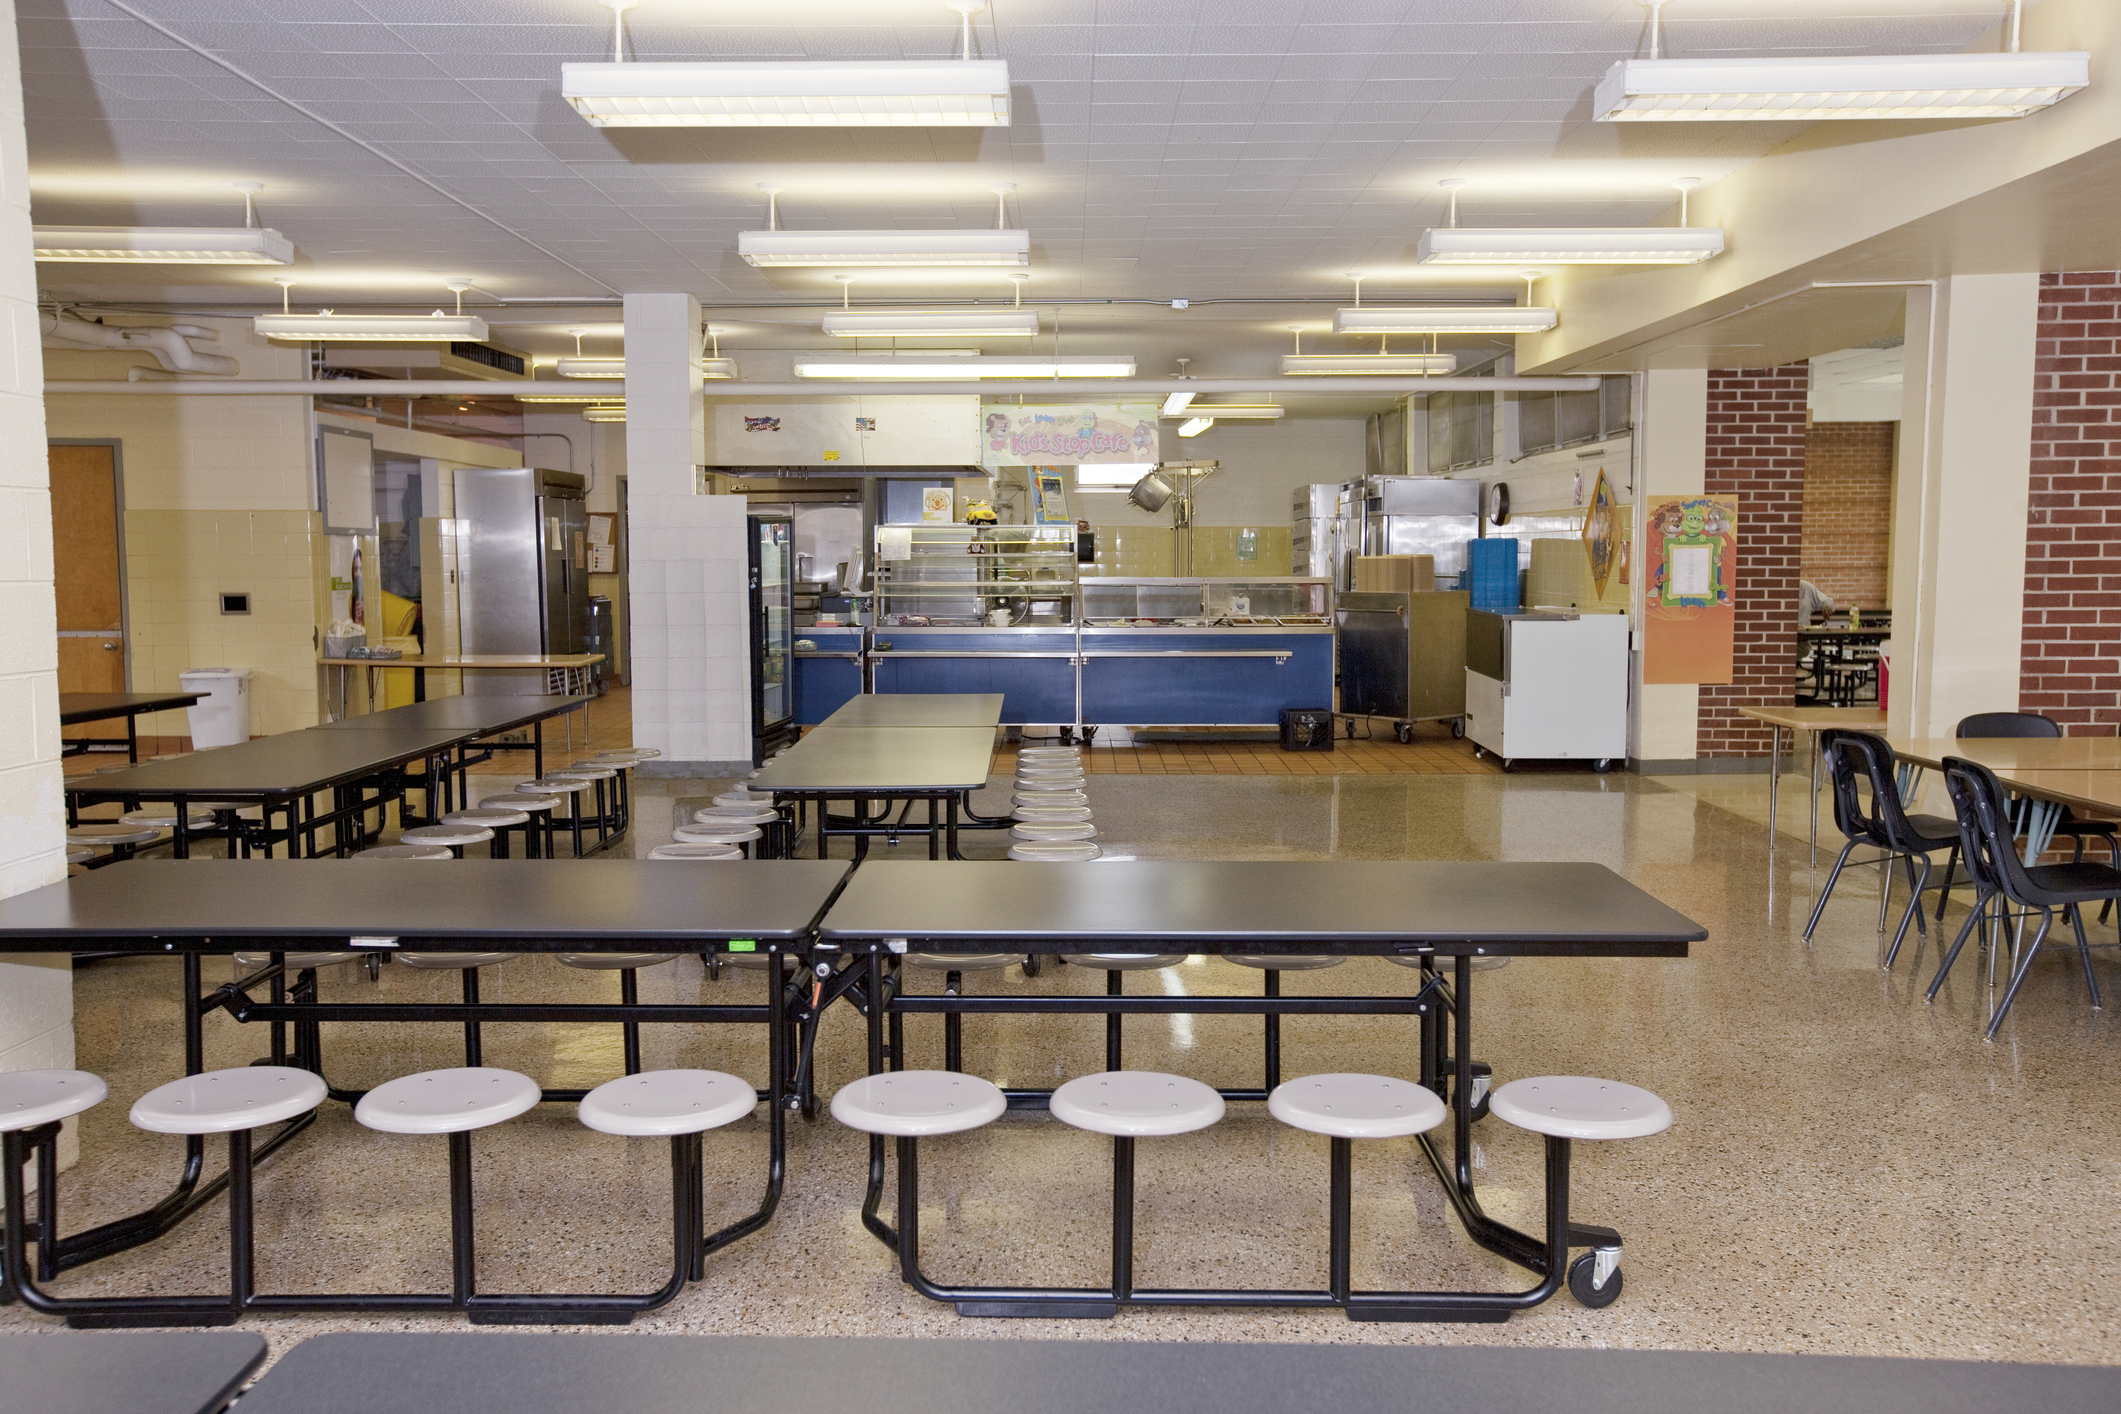 Empty school cafeteria with rows of tables and a serving area in the background